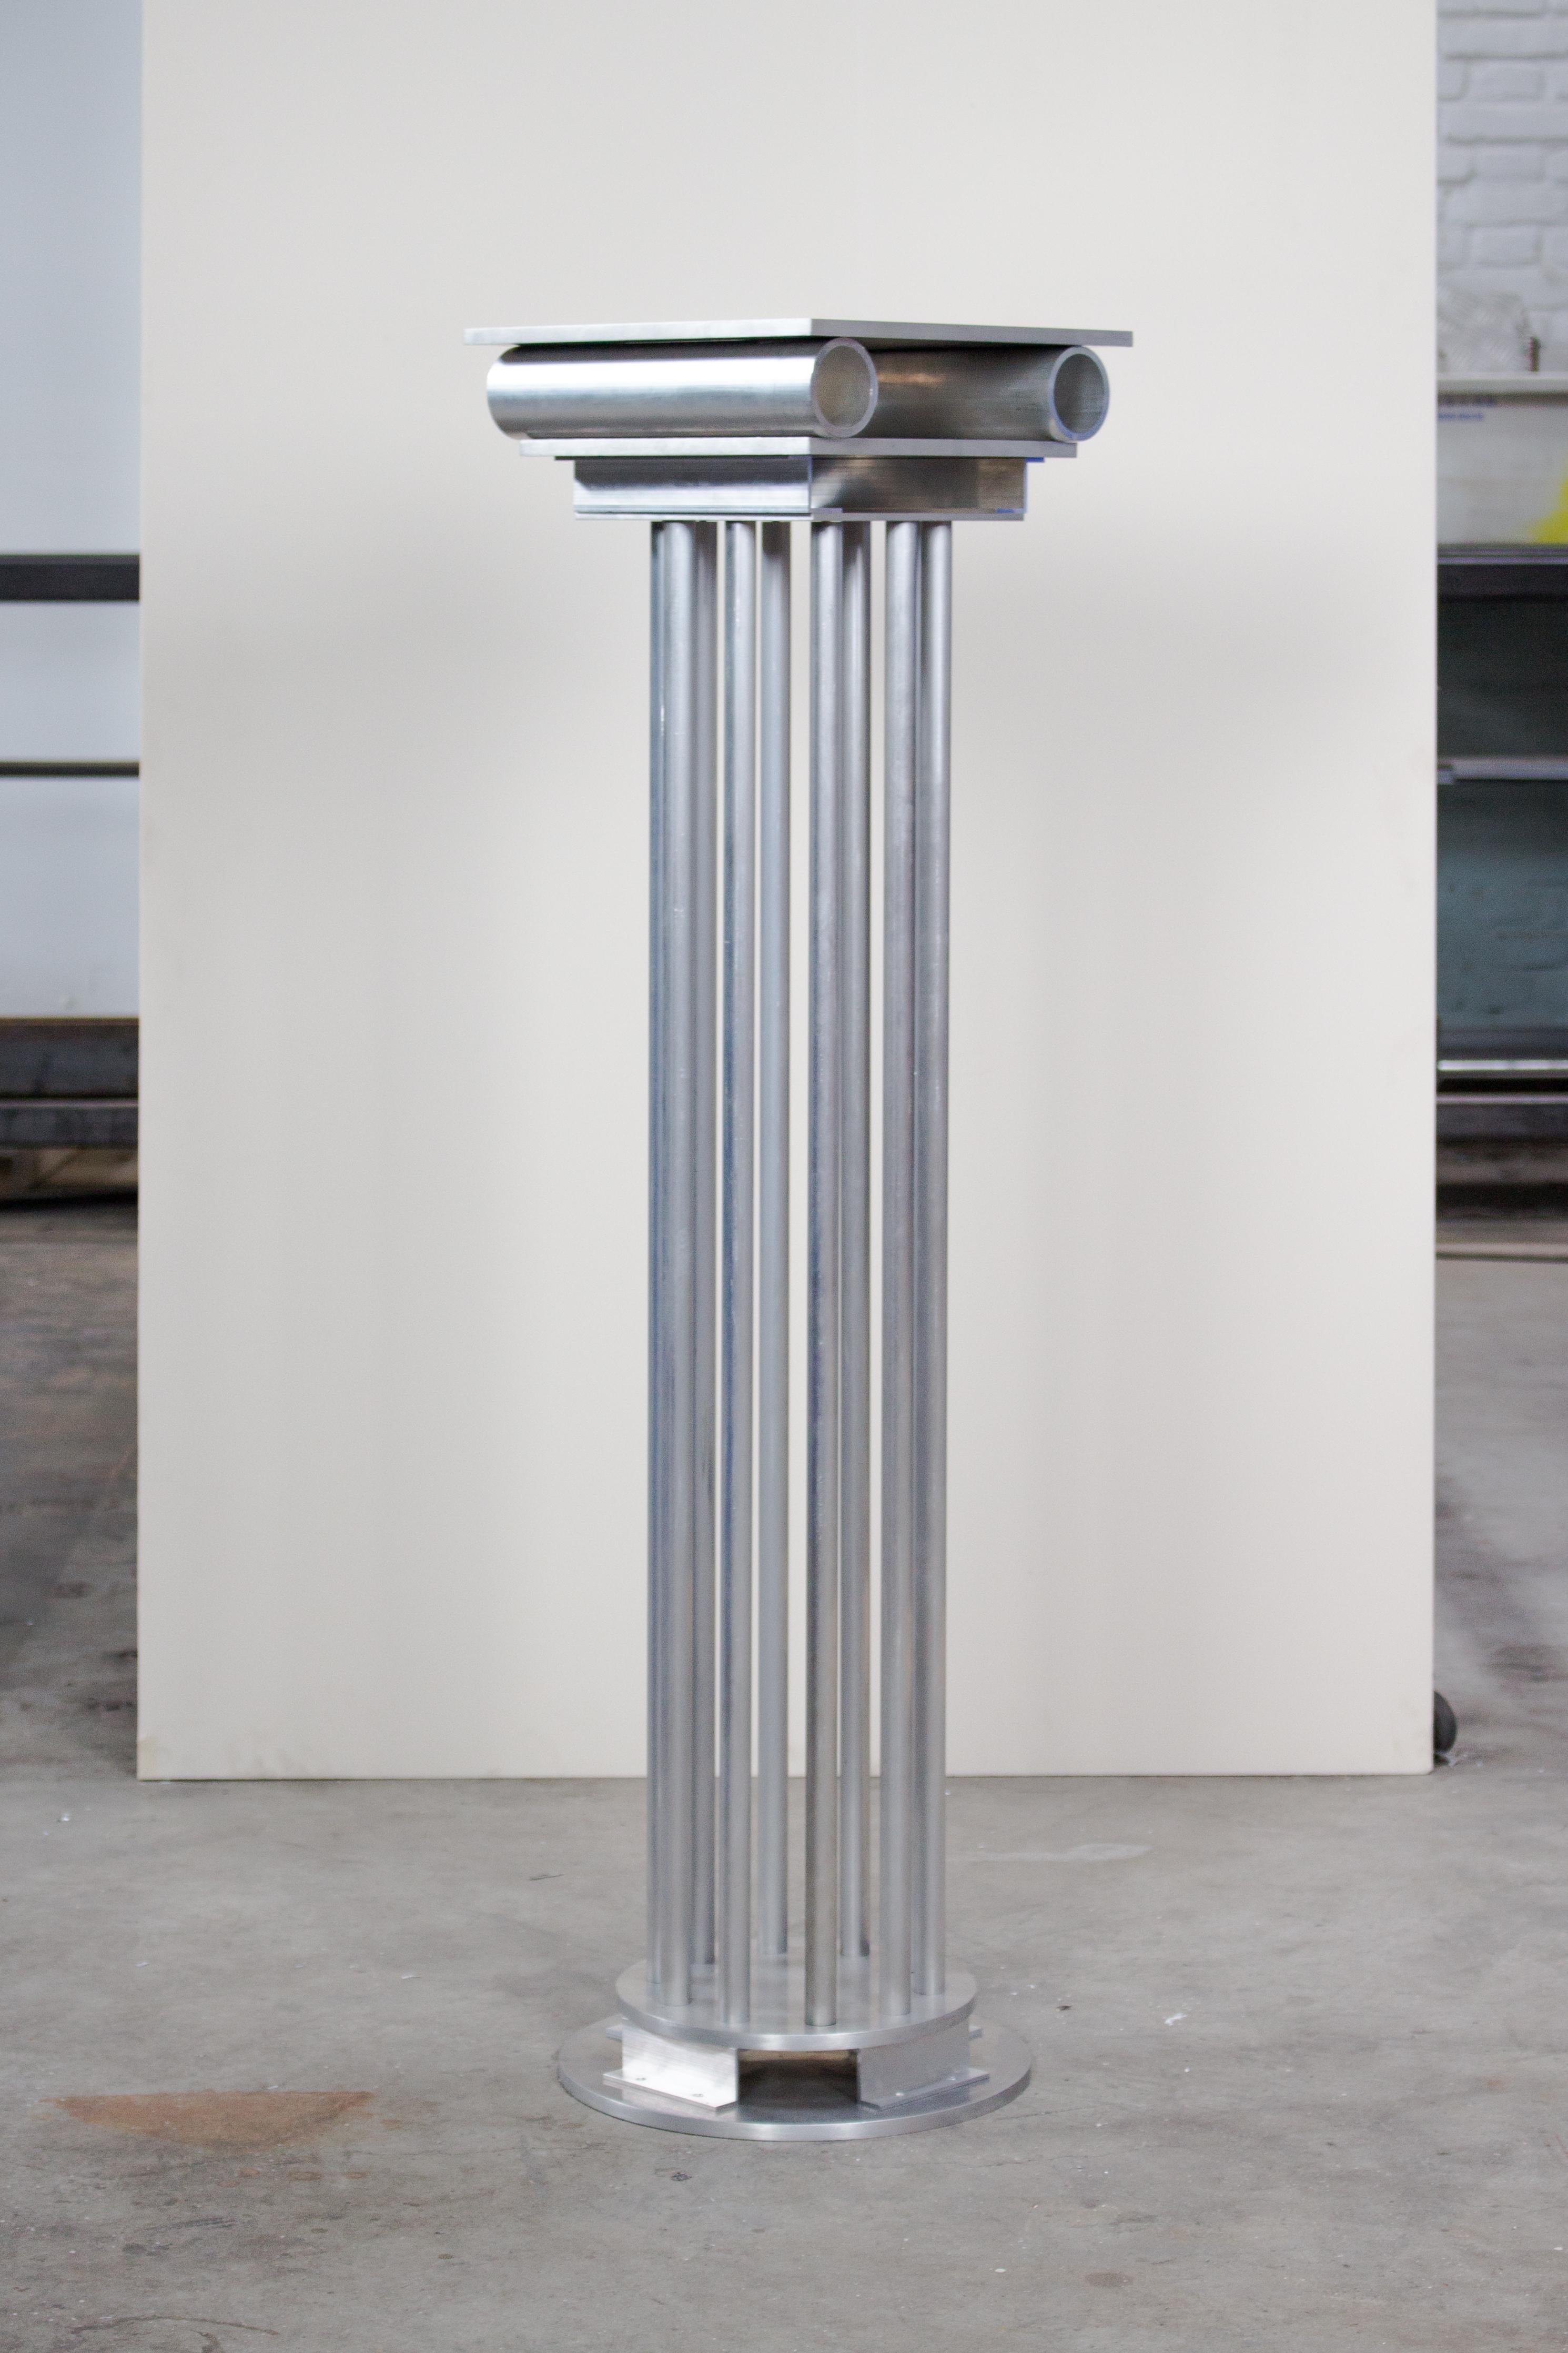 Pteron column by Joachim-Morineau Studio
Limited Edition of 8
Dimensions: H 105 x D 30 x W 30 cm, 12 kg
Materials: Aluminium tubes, profiles, screws and sheets
Possibility to have a different colour/finish (such as blasted or anodized